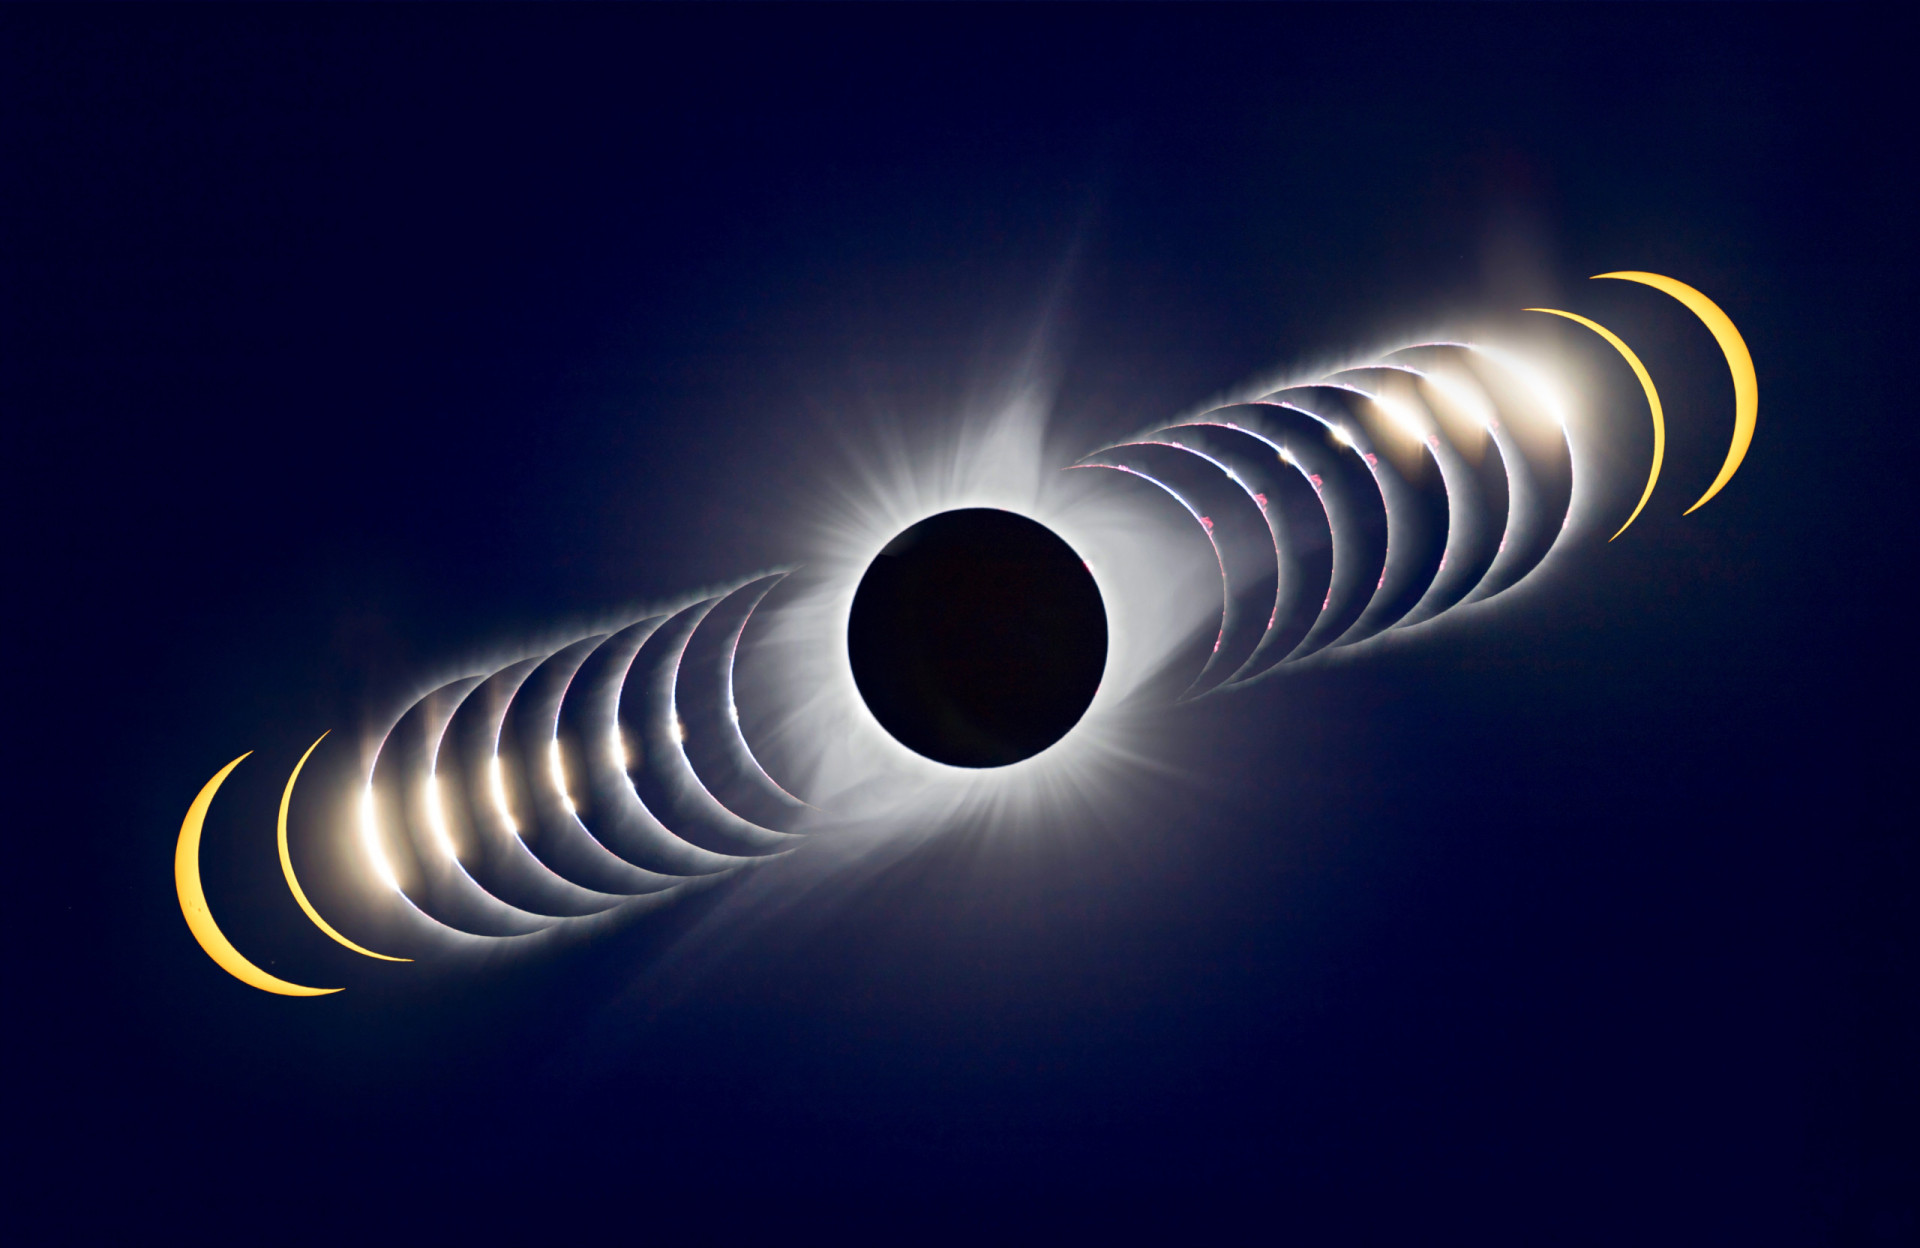 <p>On April 8, a total solar eclipse will follow a 115 mile-wide (185-km) path through parts of Mexico, 15 US states, and Canada. The celestial spectacular will also provide a partial solar eclipse for the entire Americas. Providing the skies are clear, residents, citizen scientists, and eclipse tourists will enjoy one of the most dramatic events witnessed in our solar system. And this rare scientific phenomenon, the first full eclipse visible in the <a href="https://www.starsinsider.com/lifestyle/618144/the-canada-united-states-border-is-the-longest-international-border-in-the-world" rel="noopener">United States</a> since 2017, will not be repeated in the country until 2046. But which locations in the US provide the best places to watch the eclipse unfold, how can you gaze skywards in safety, and why is NASA firing three rockets towards to Moon during the blackout? </p> <p>To find the answers to these question and more, click through this gallery before the Sun disappears!</p><p>You may also like:<a href="https://www.starsinsider.com/n/64251?utm_source=msn.com&utm_medium=display&utm_campaign=referral_description&utm_content=695978en-ca"> These celebrities have some strange superstitions </a></p>